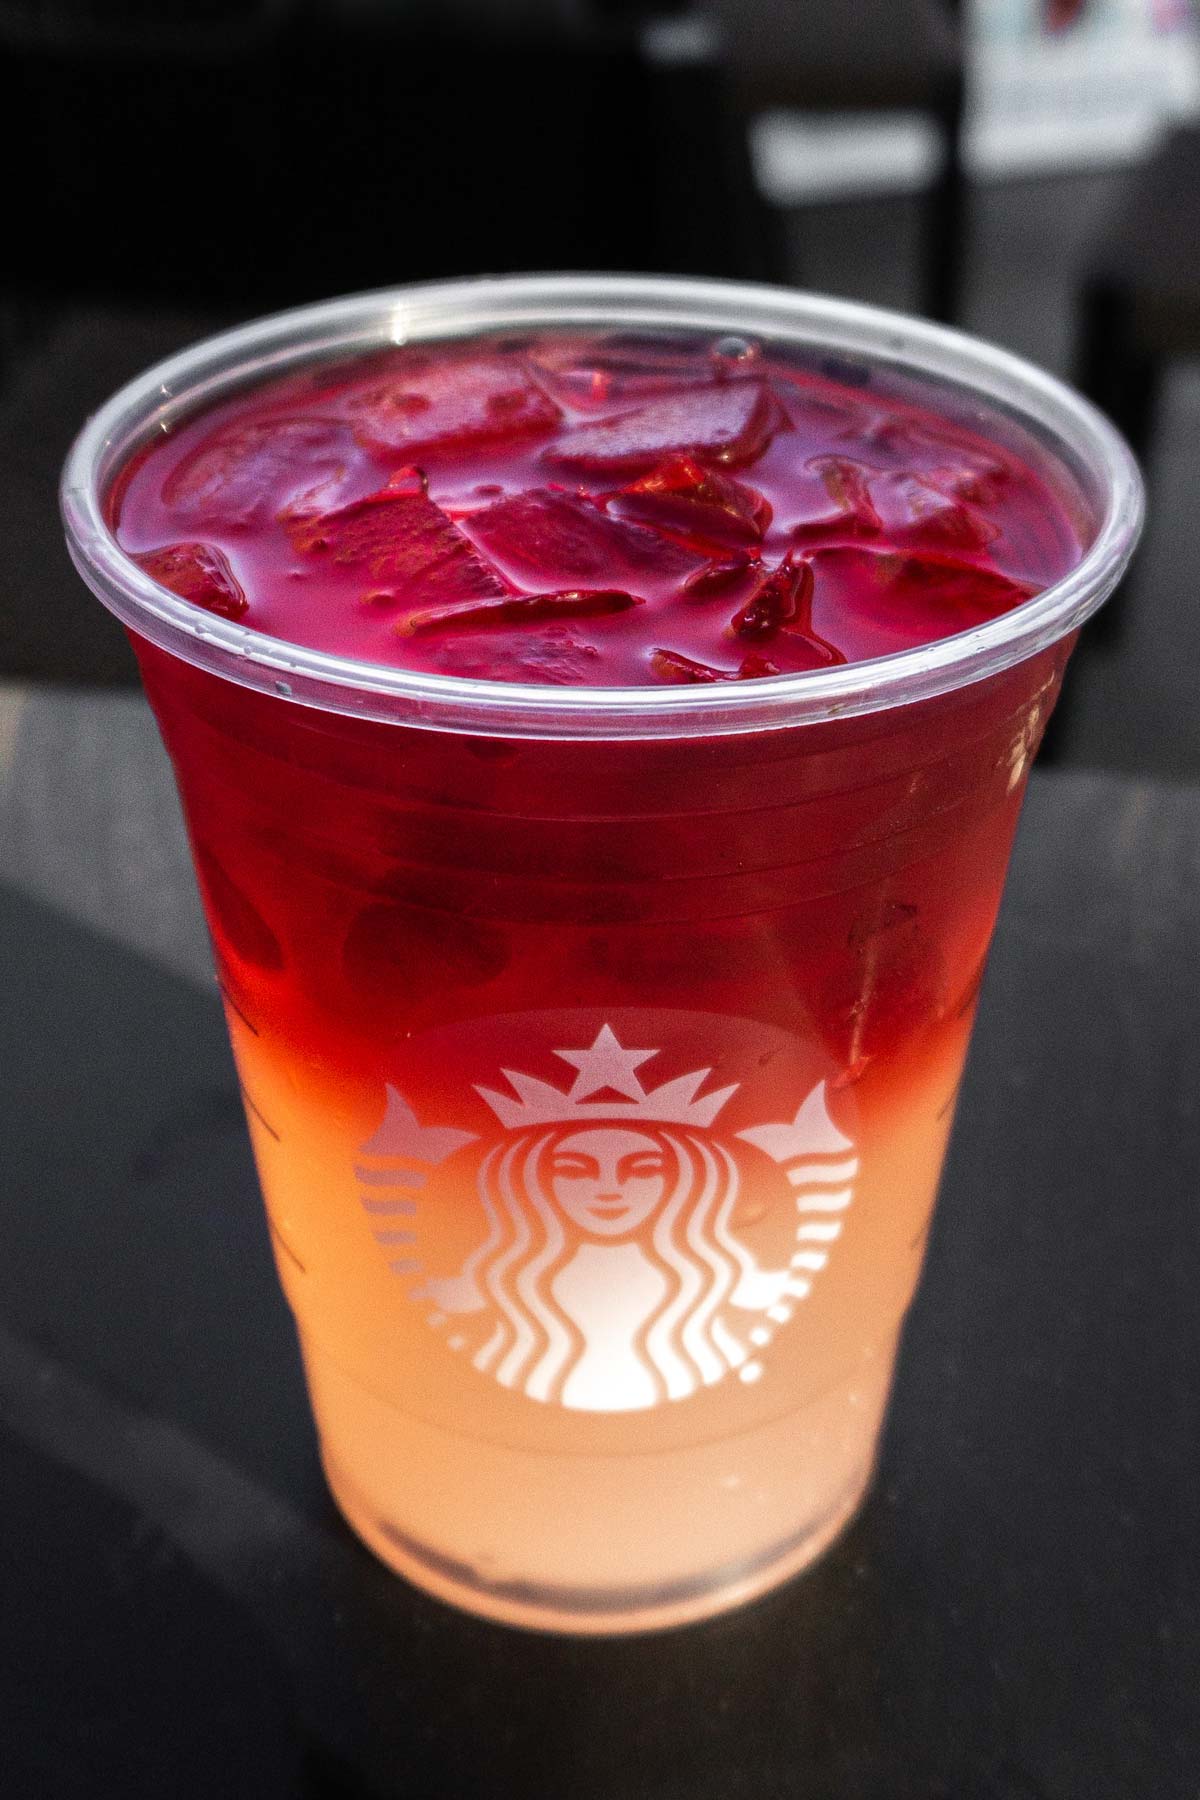 Large cup of Starbucks ombre colored lemonade and iced tea in a cup with ice.